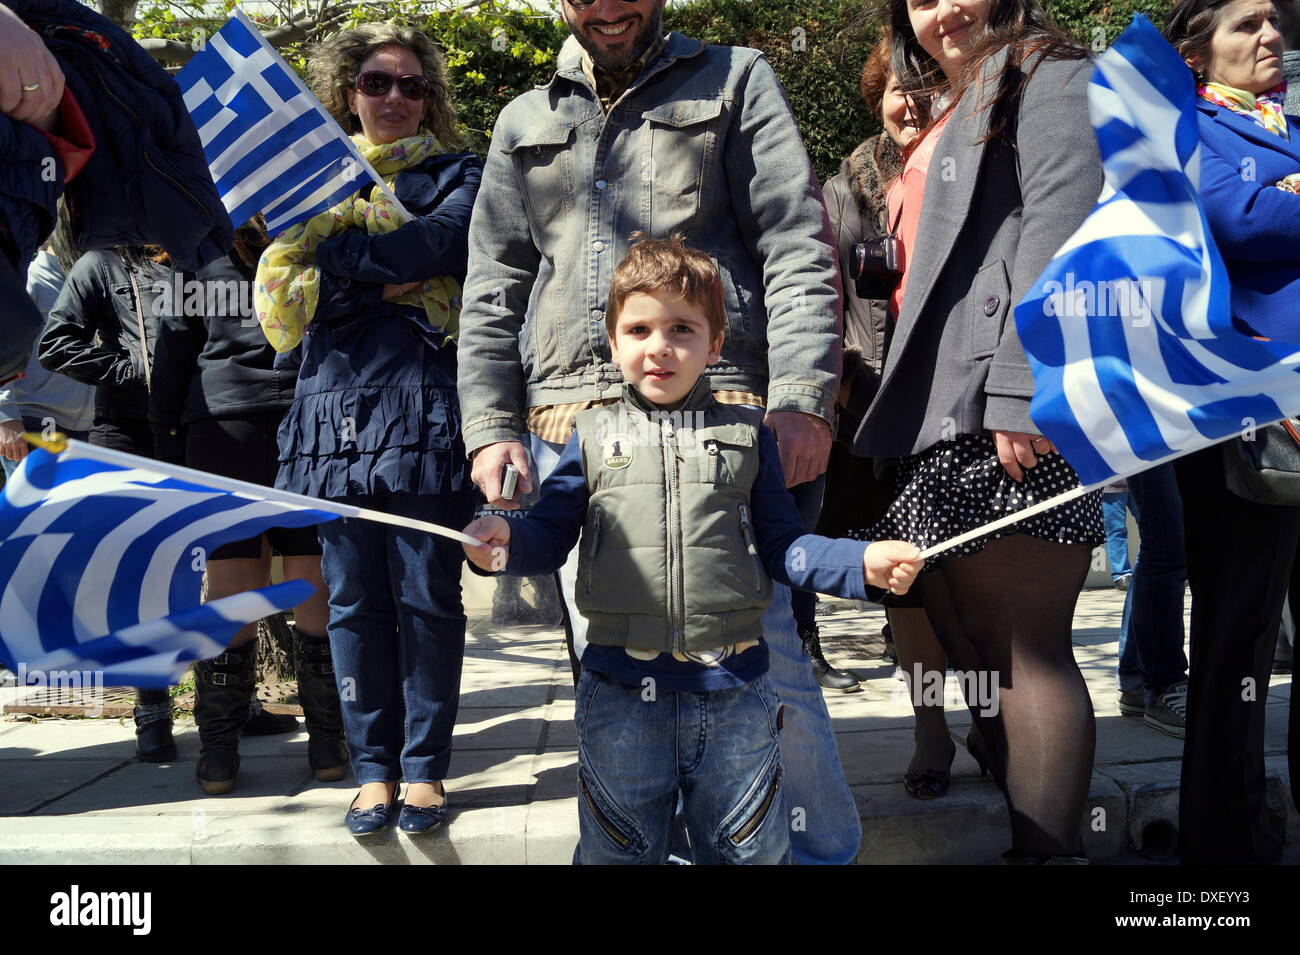 Thessaloniki, Greece. 25th March 2014. A child waving Greek flags during the annual parade on Tuesday, celebrating the Greek independence day, in the northern Greek port city of Thessaloniki. Greeks celebrated their national independence day amid tight security and protest in the northern port city of Thessaloniki, as school teachers staged a protest against planned layoffs as part of governments cost cutting reforms.  Credit:  Orhan Tsolak/Alamy Live News Stock Photo